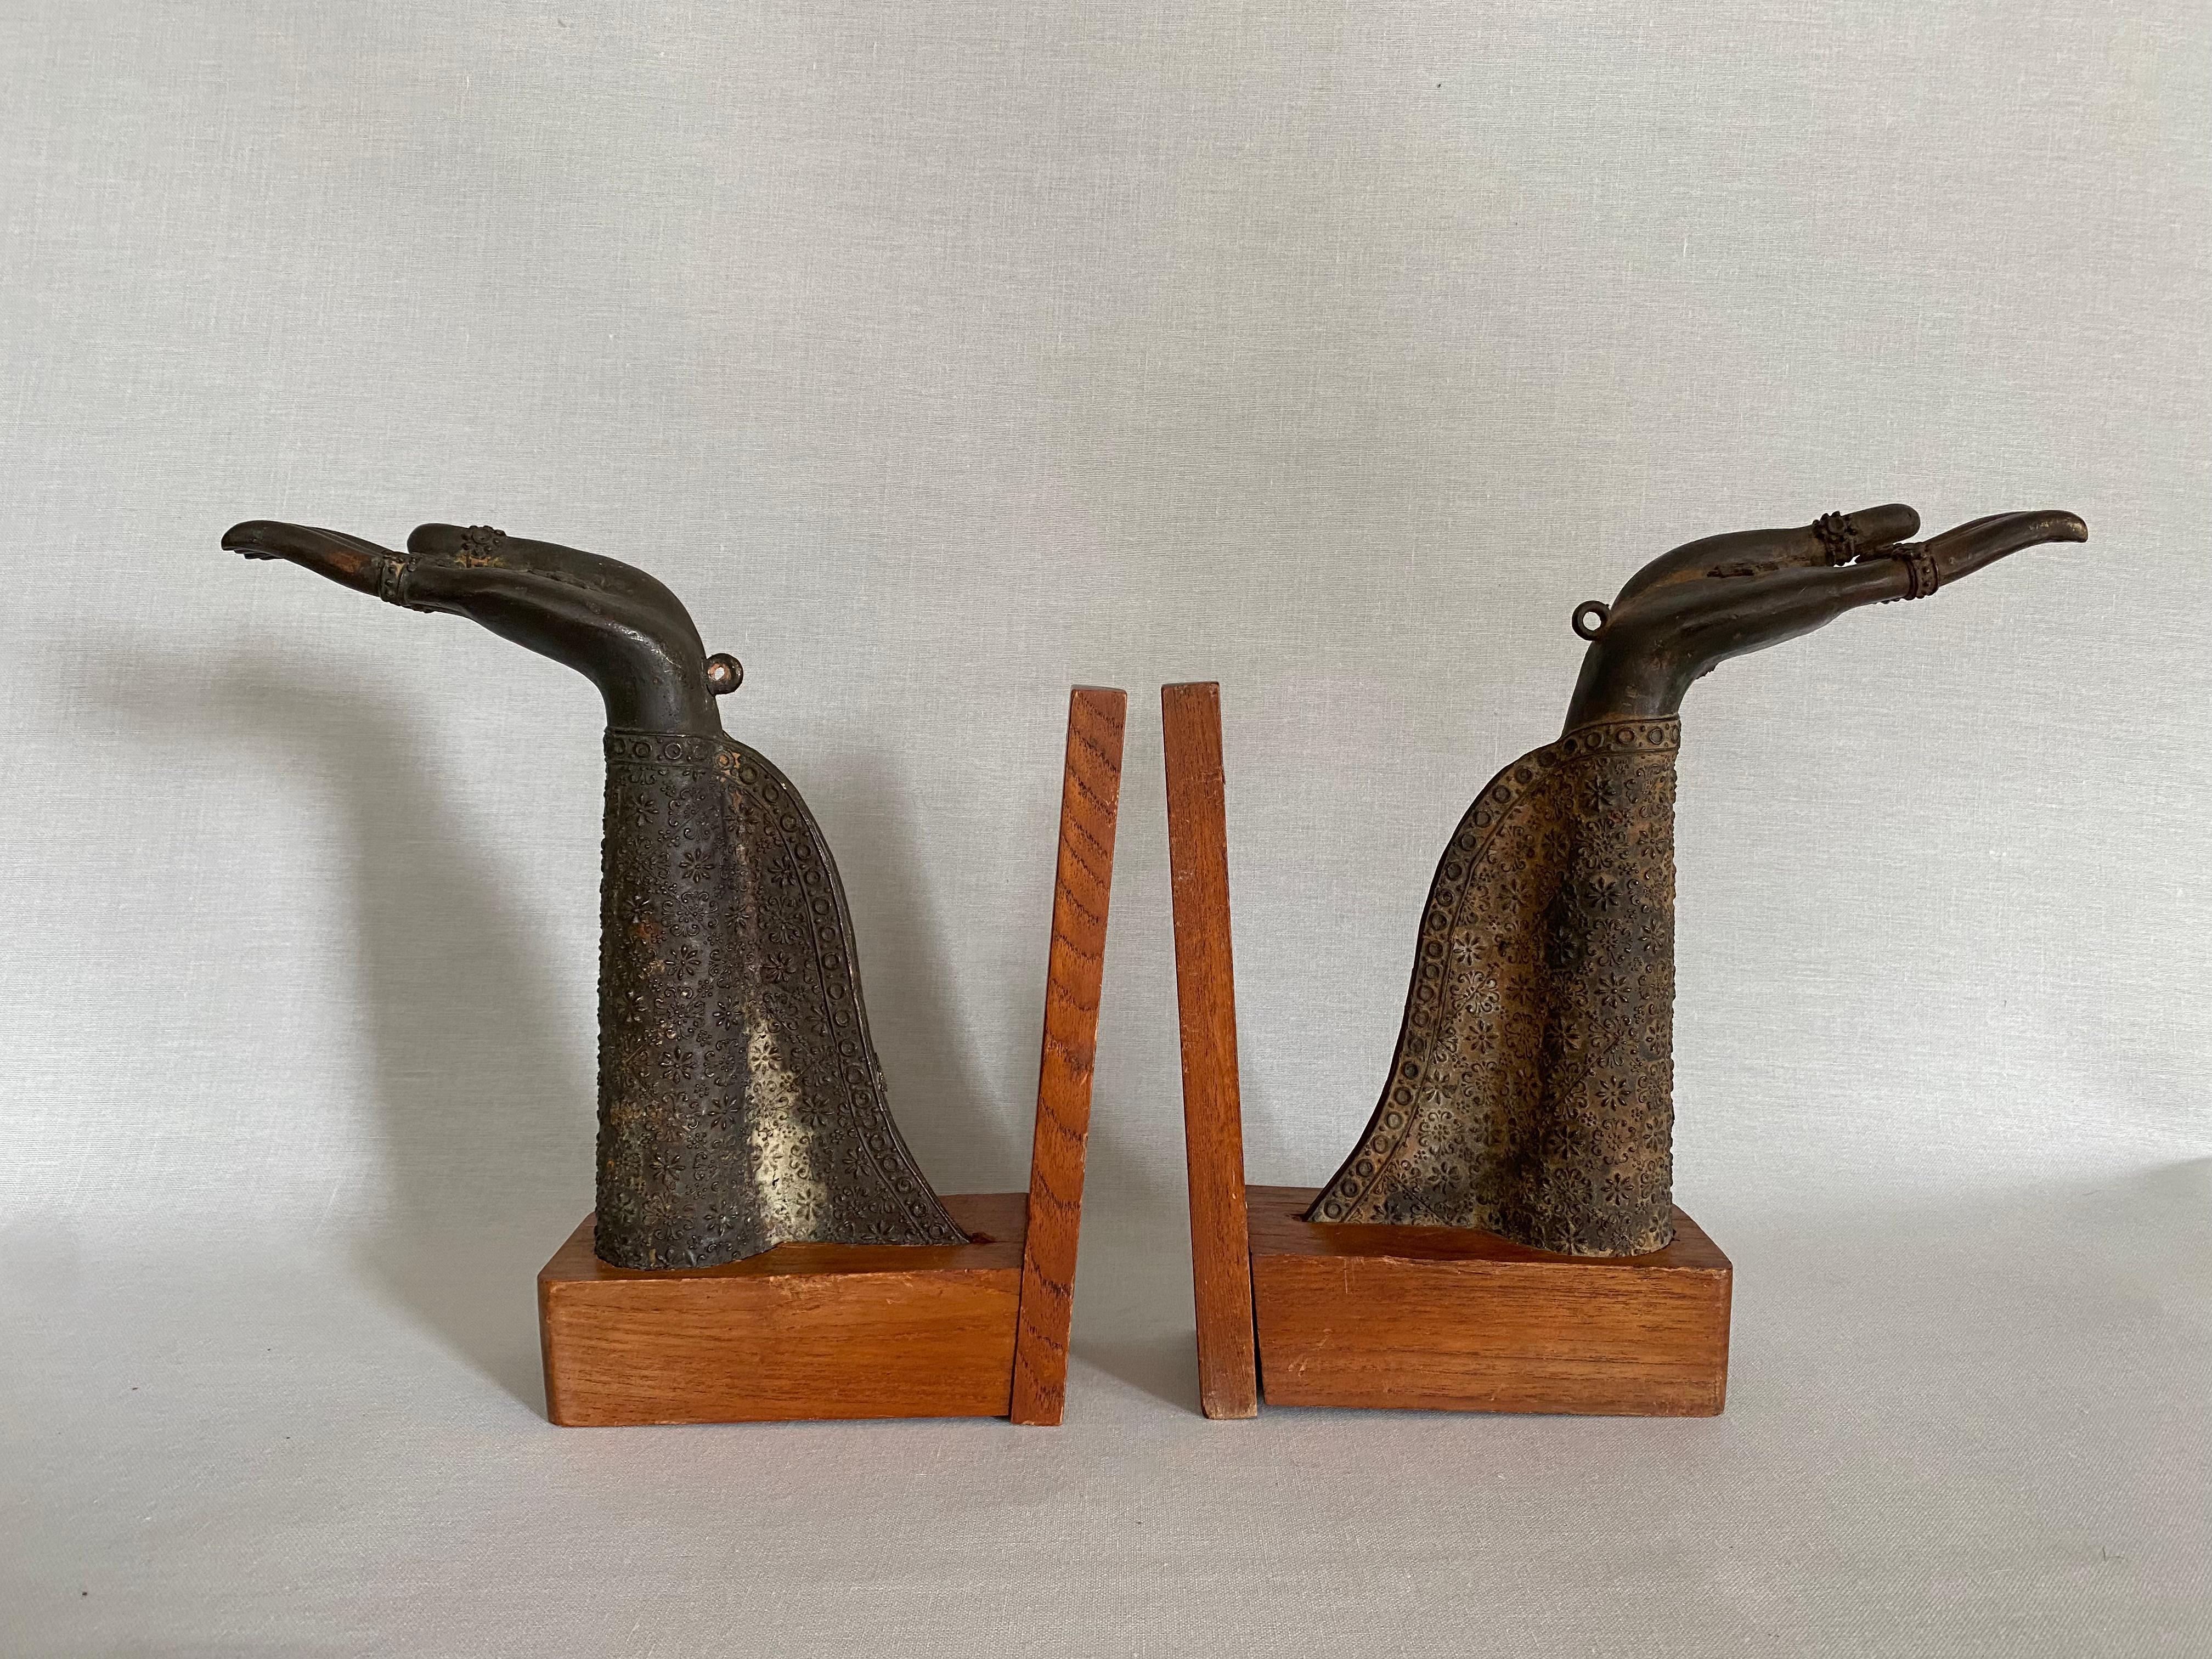 Pair of Thai Bronze Buddha Hands Fragments repurposed as bookends.
The bronze fragments are mounted on simple wooden bases so that they can be used as bookends. The hands and the robe have a beautiful patina and are decorated with many fine